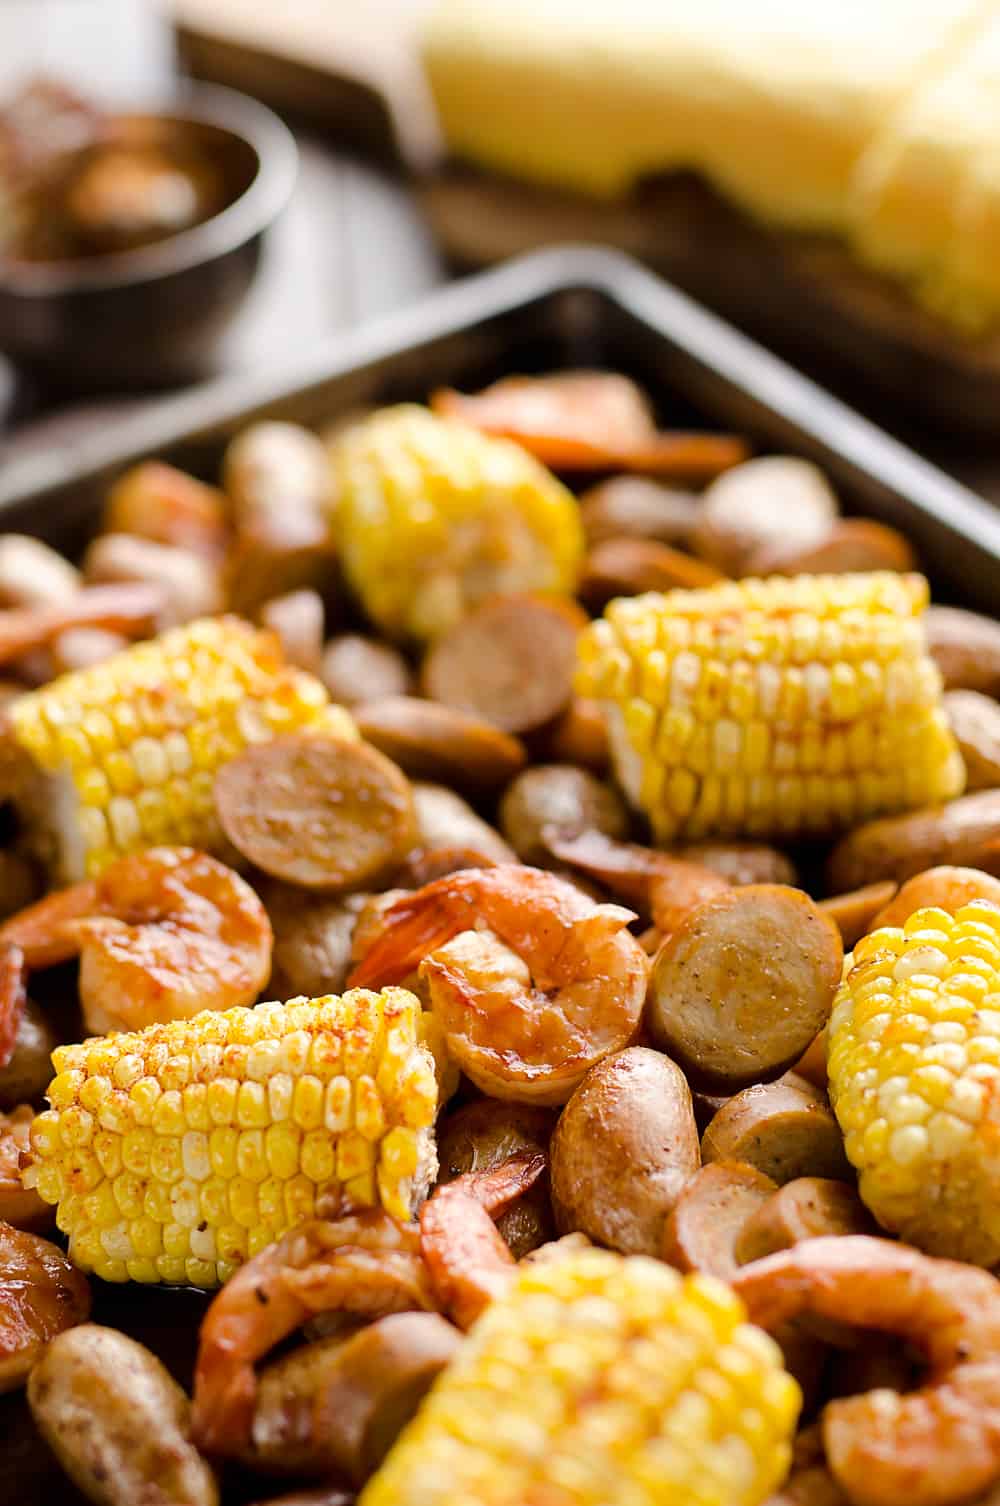 BBQ Shrimp & Sausage Sheet Pan Dinner is an easy and wholesome recipe perfect for a weeknight family dinner. Roasted sweet corn and potatoes are paired with BBQ shrimp and Gold'n Plump Hickory Smoked Sliced Chicken Sausage for a comforting low-fat meal!